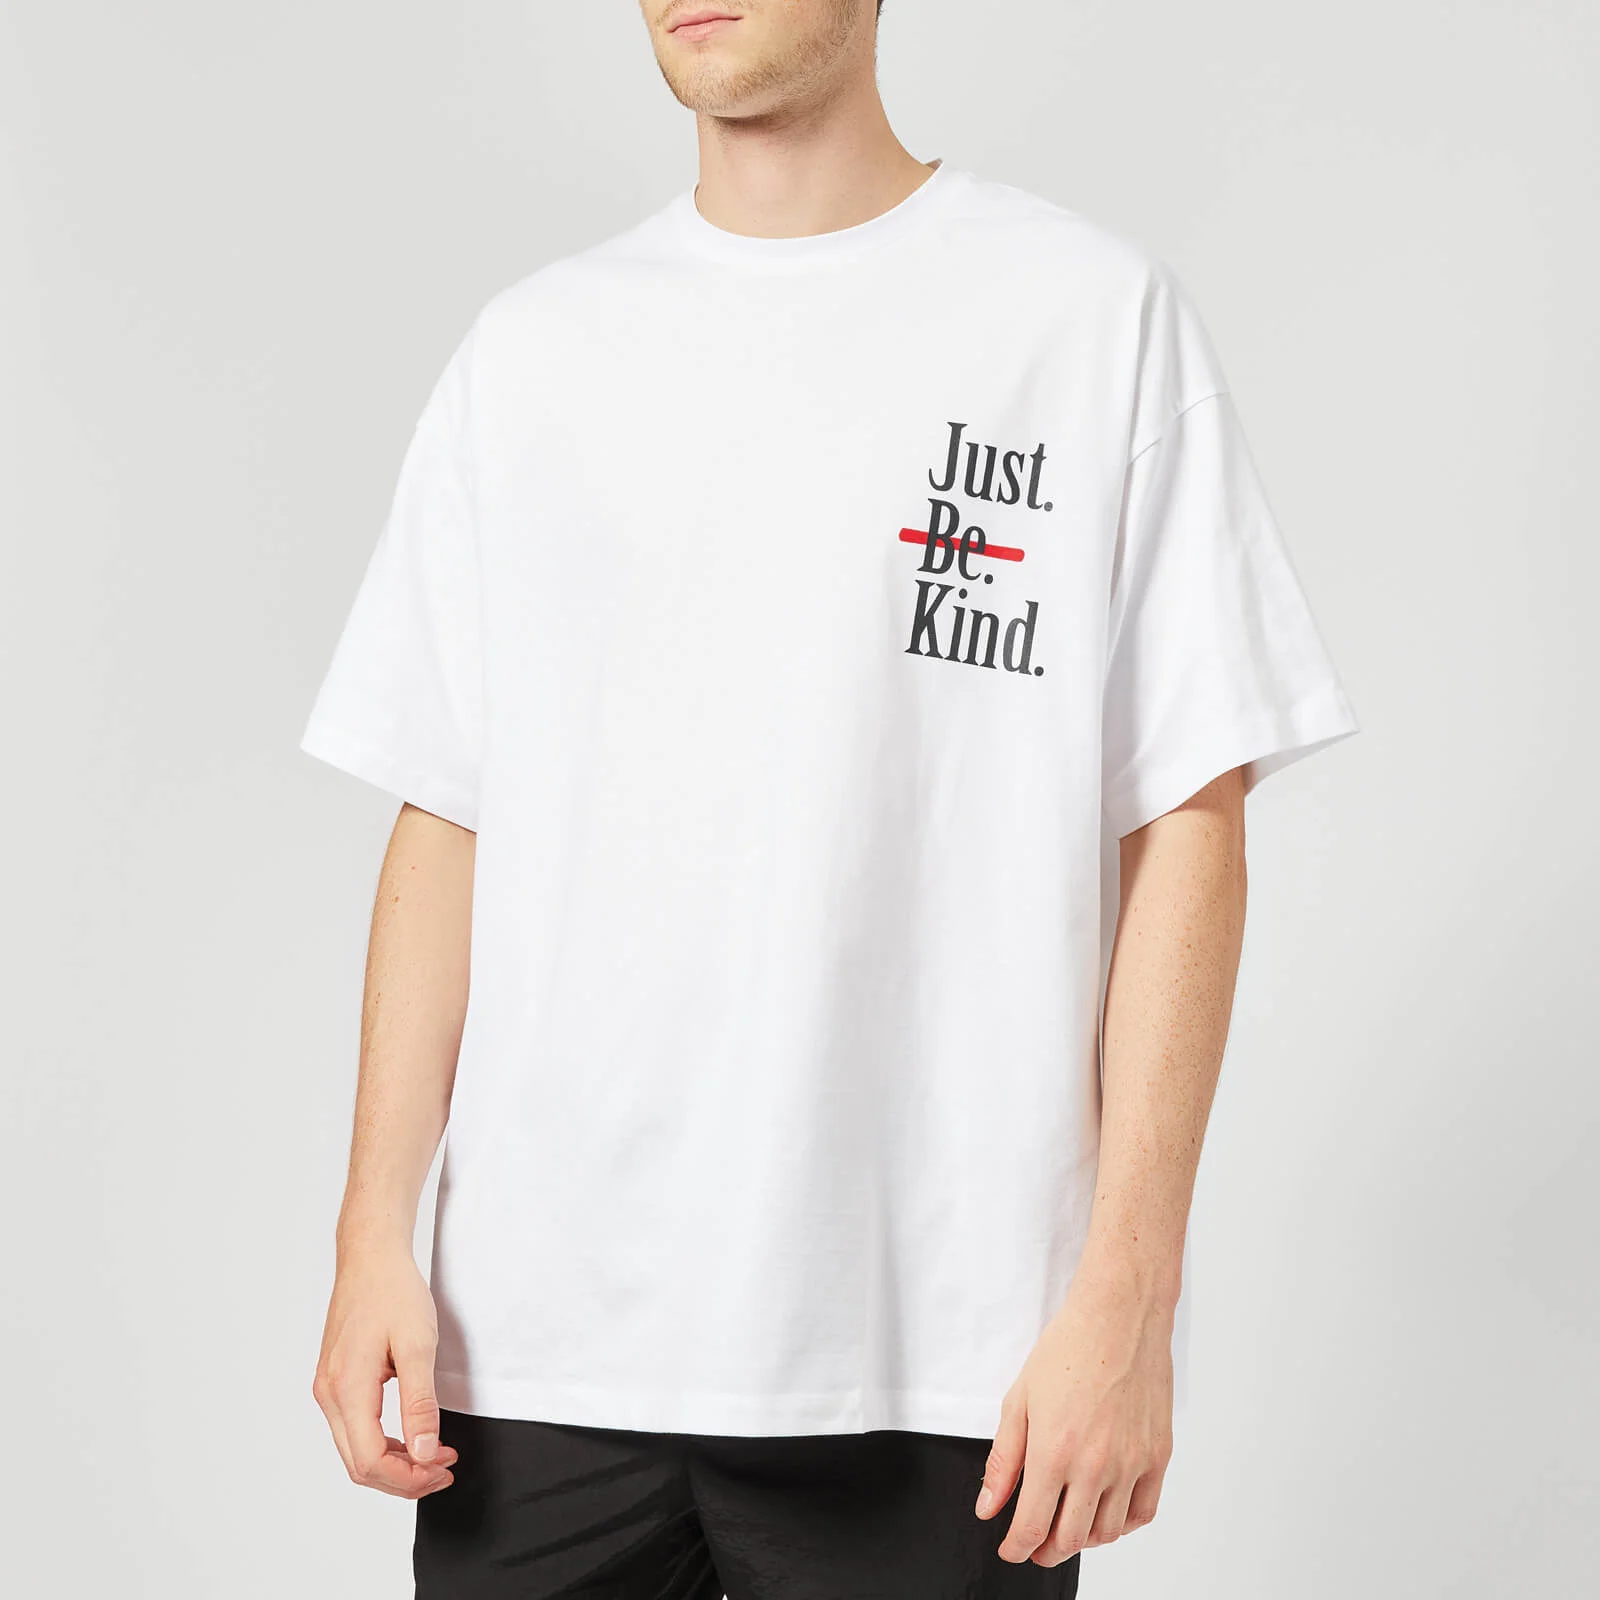 Wooyoungmi Men's Just Be Kind T-Shirt - White Image 1